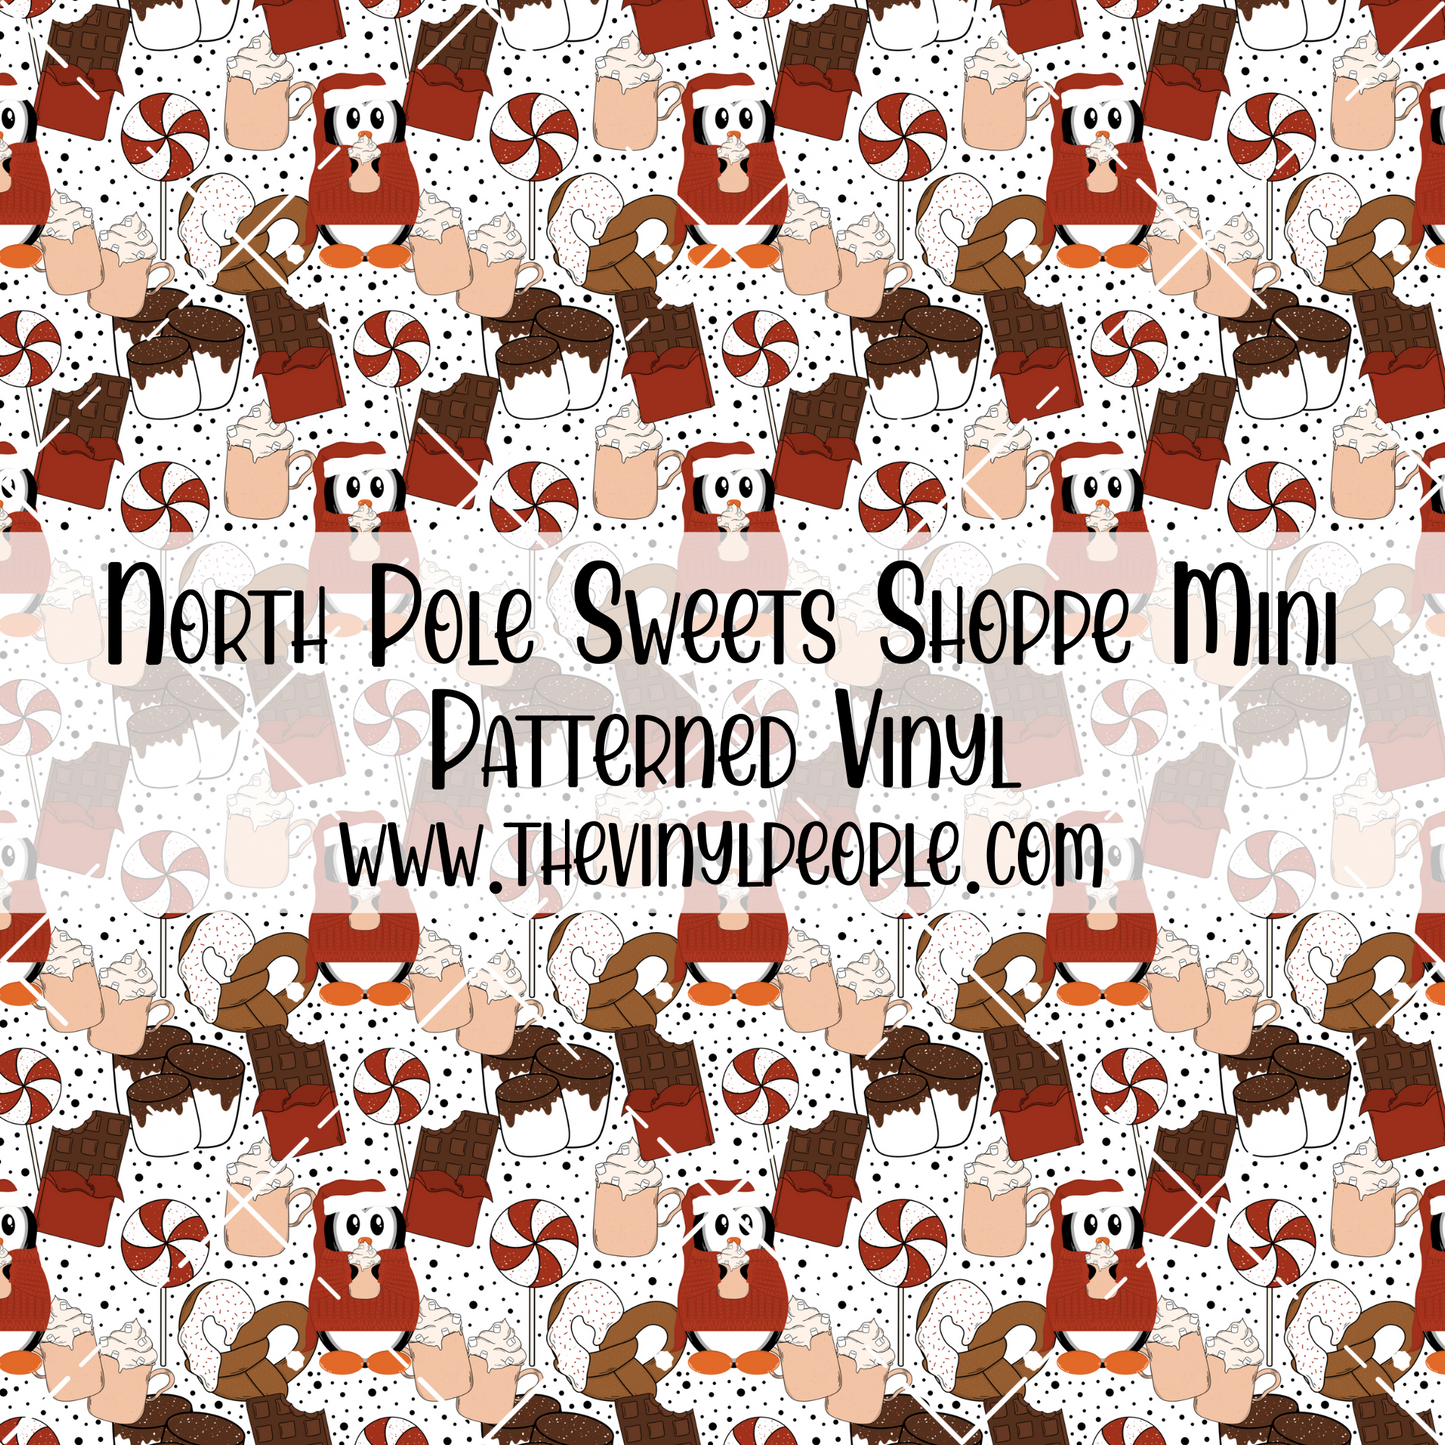 North Pole Sweets Shoppe Patterned Vinyl